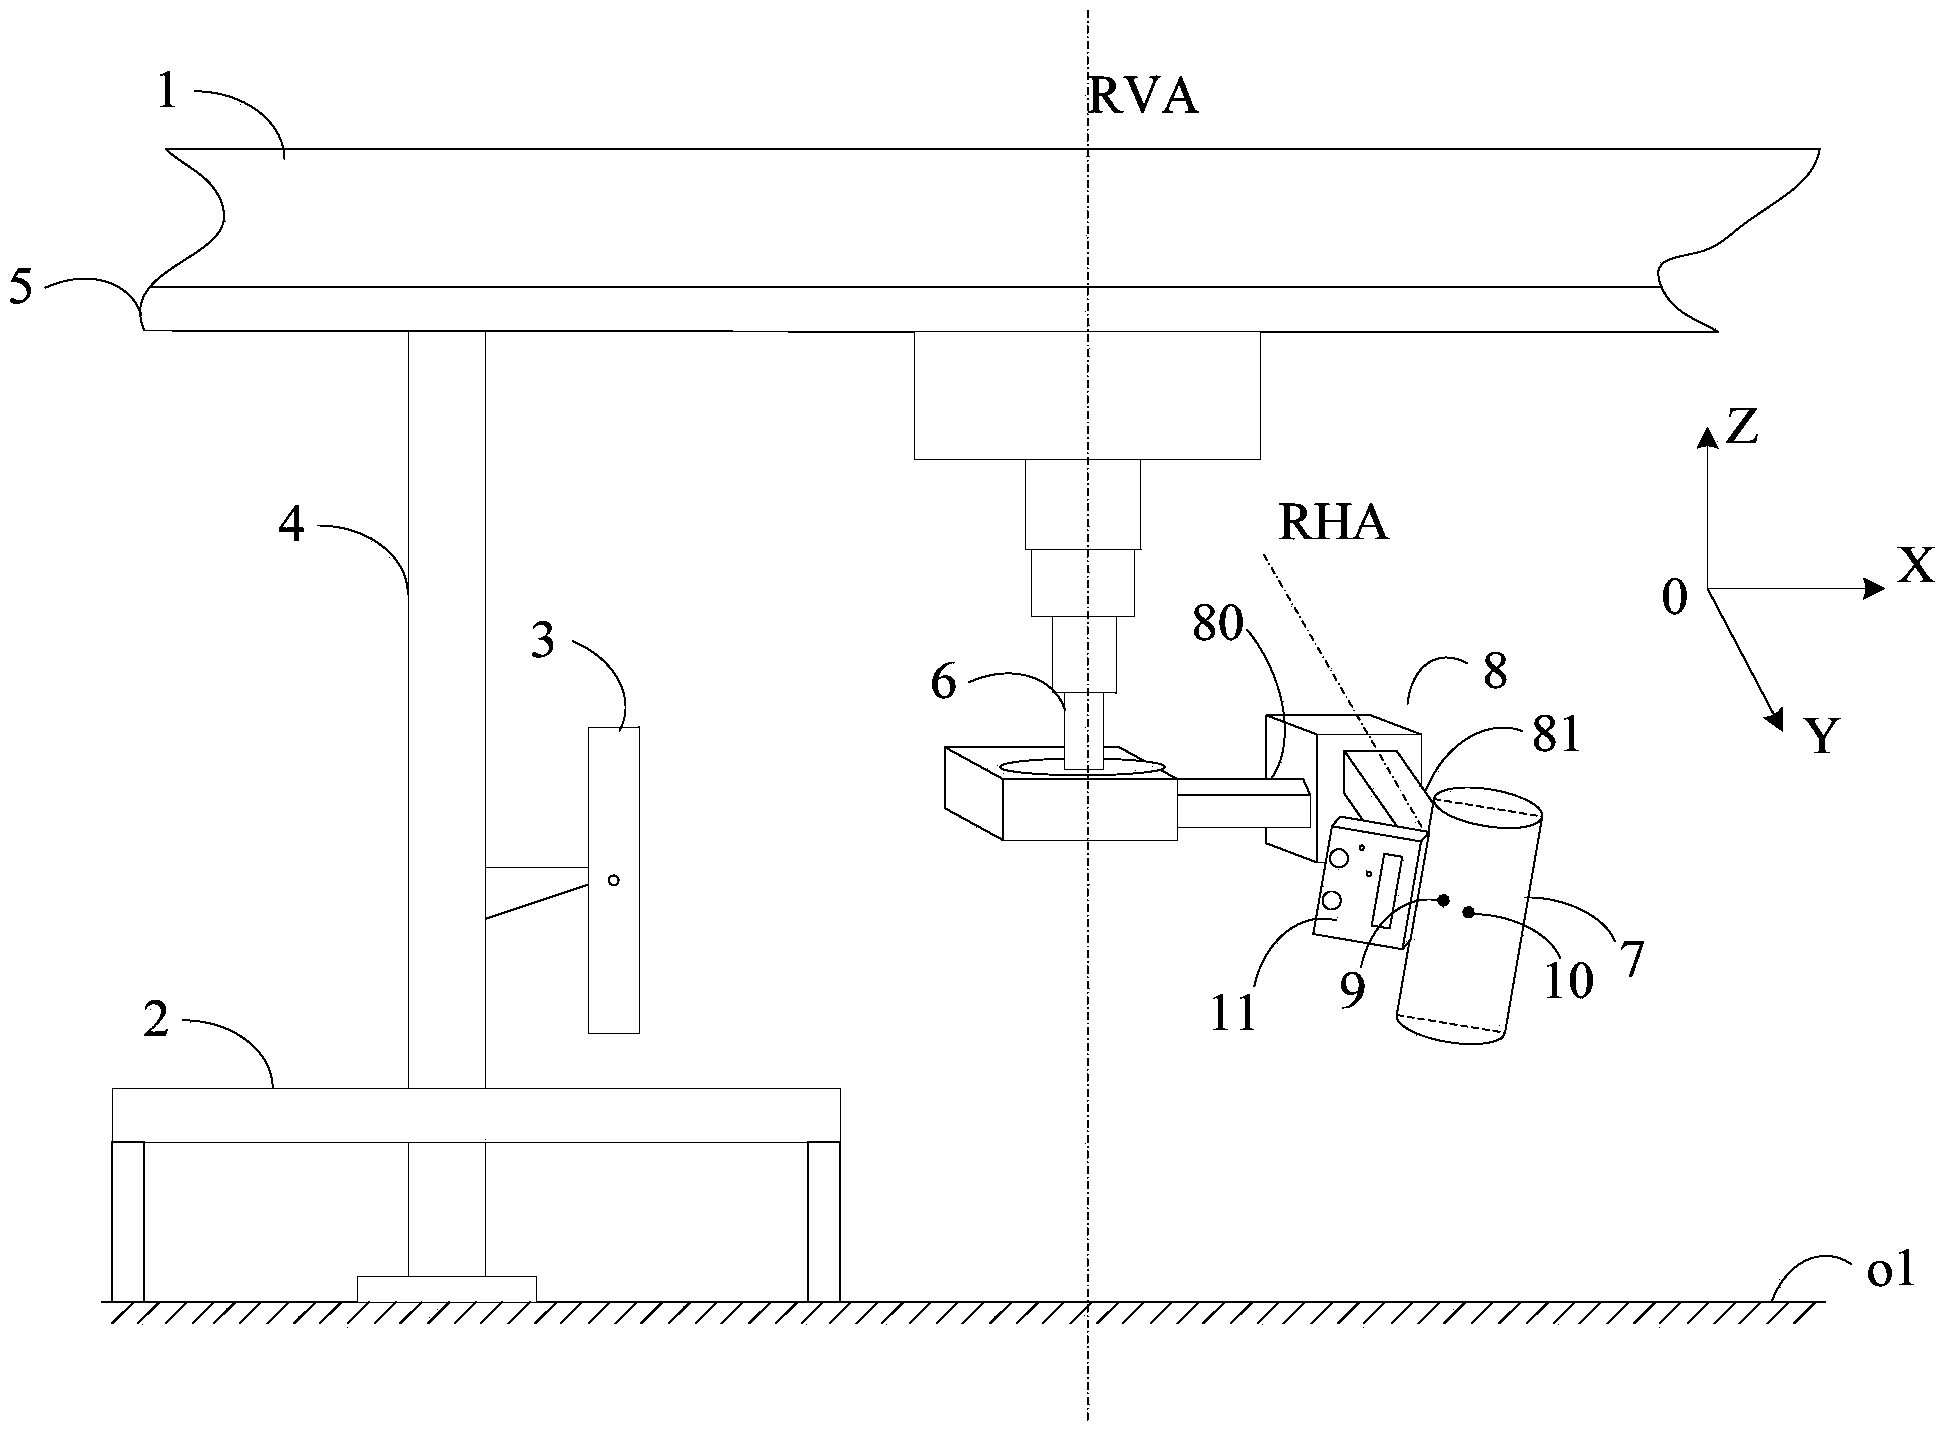 X-ray image acquisition method and device